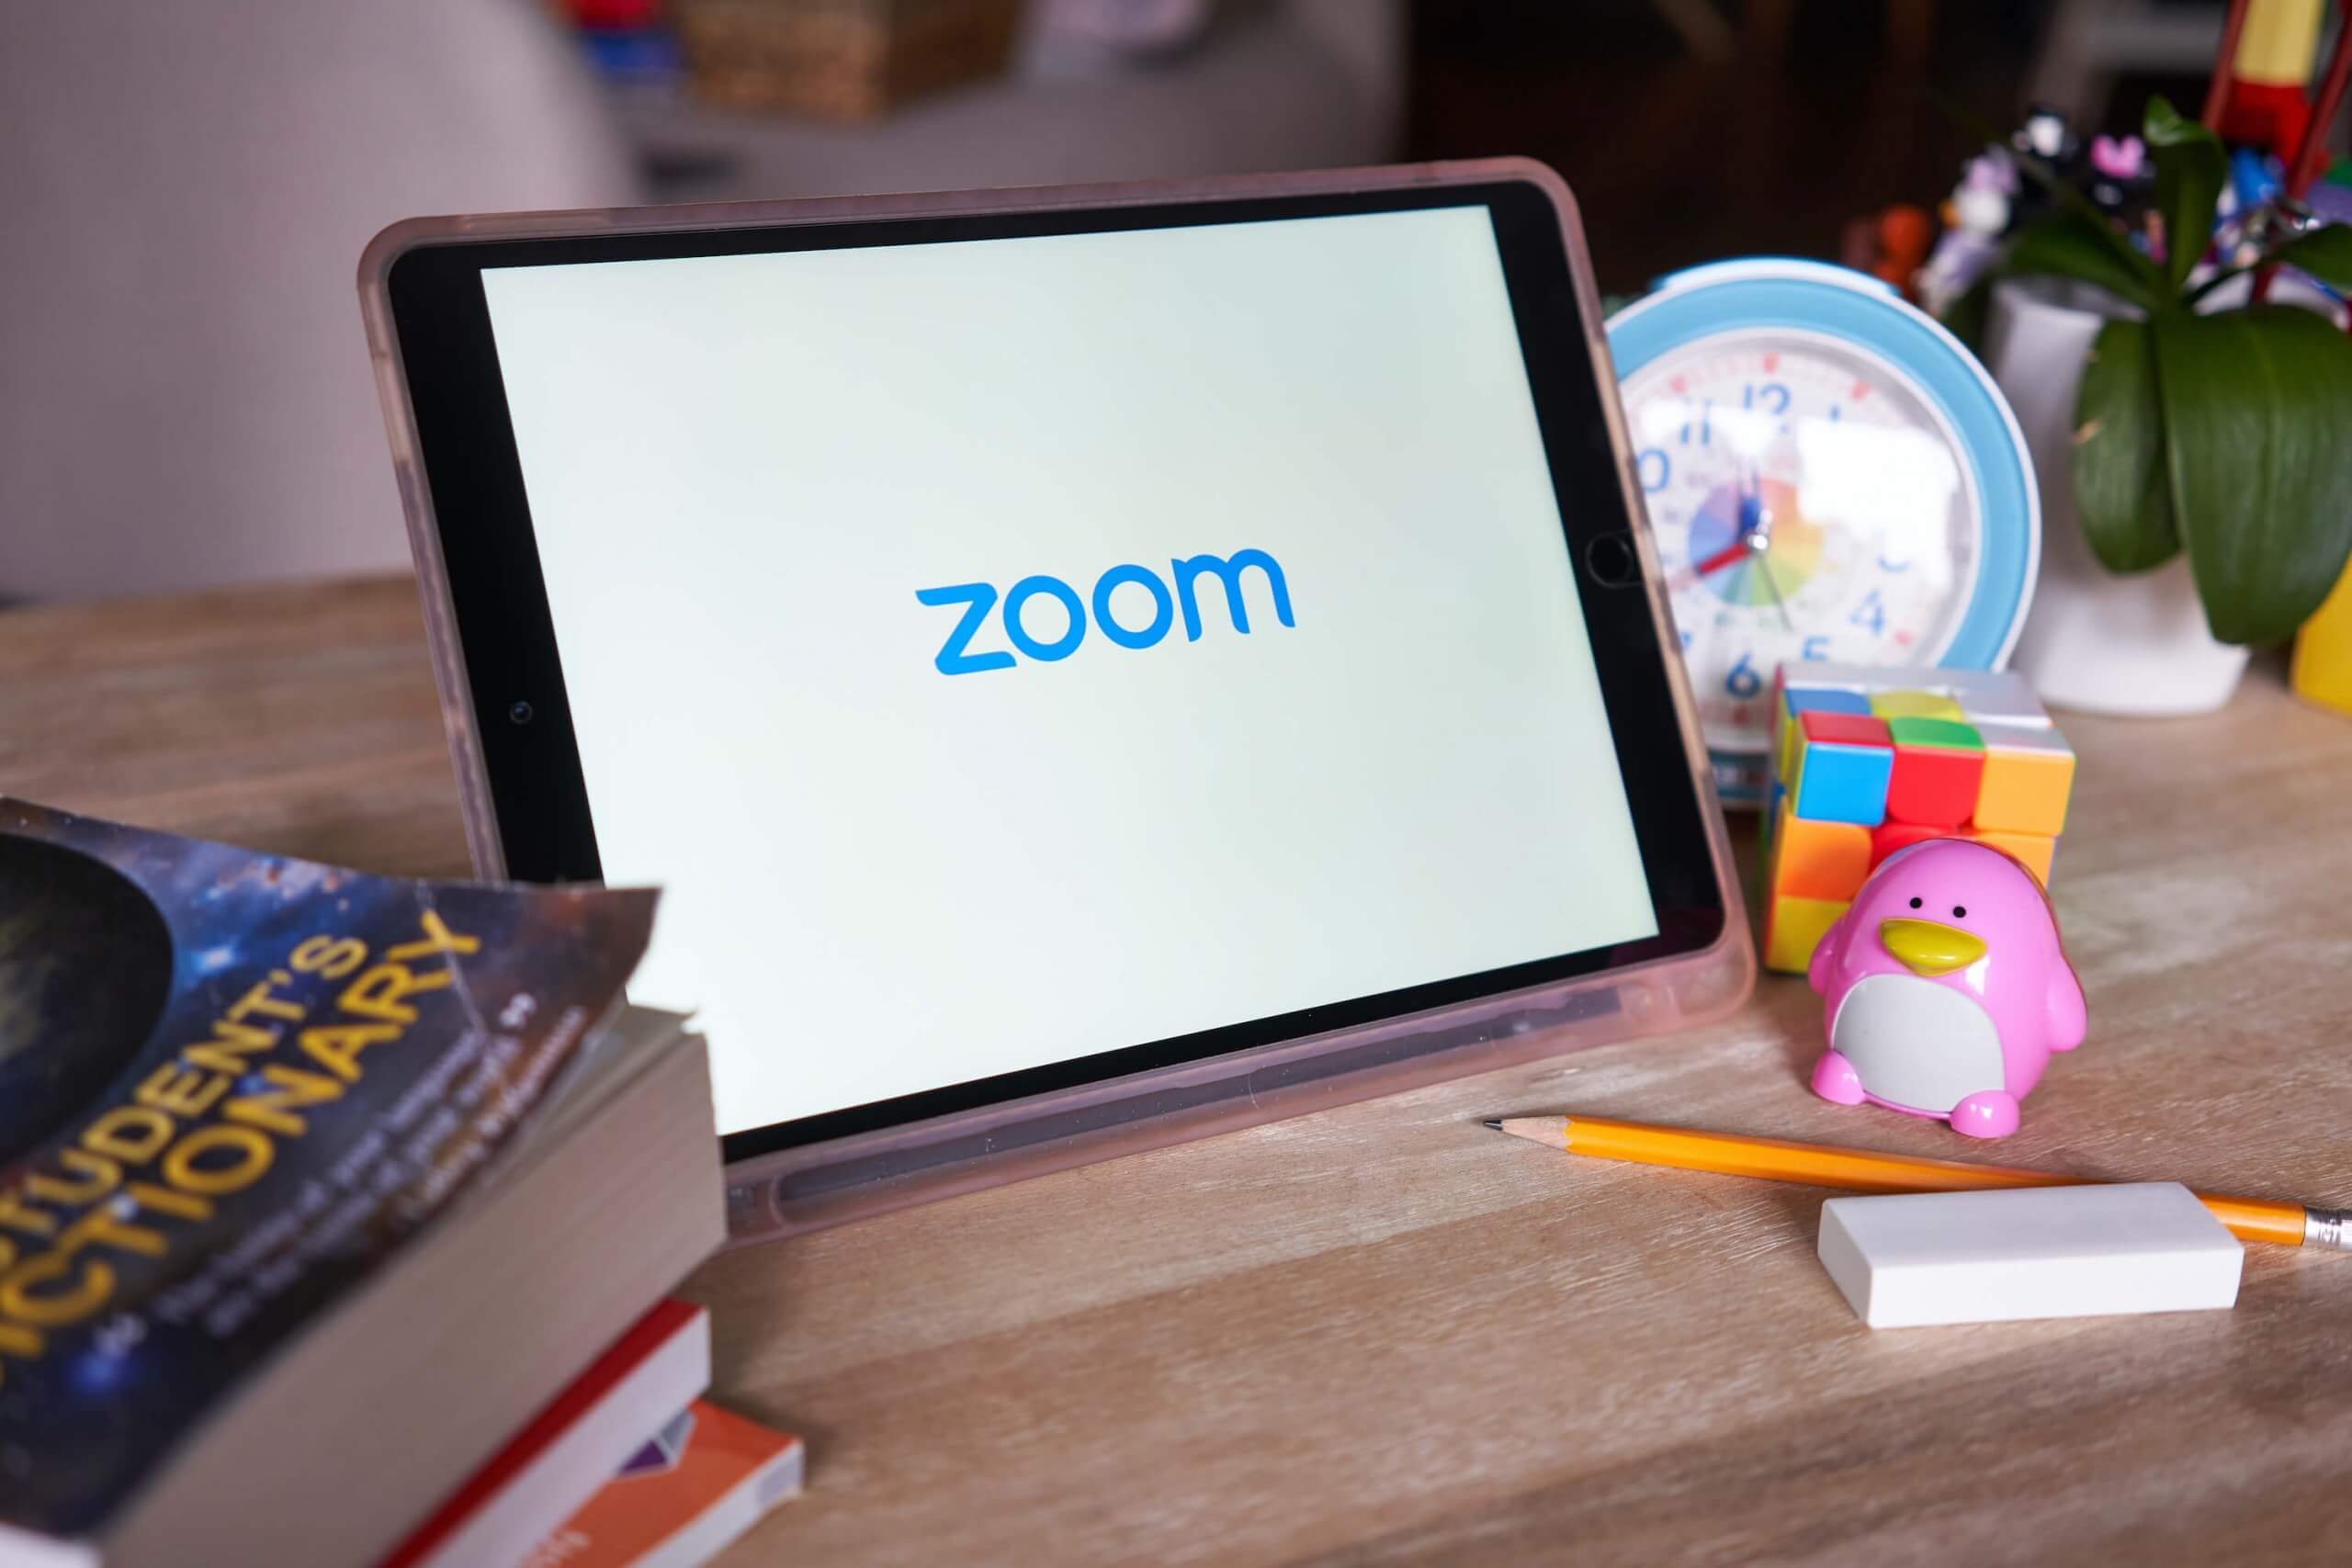 Zoom skyrockets to 200 million users, puts 90-day hold on features to address security flaws